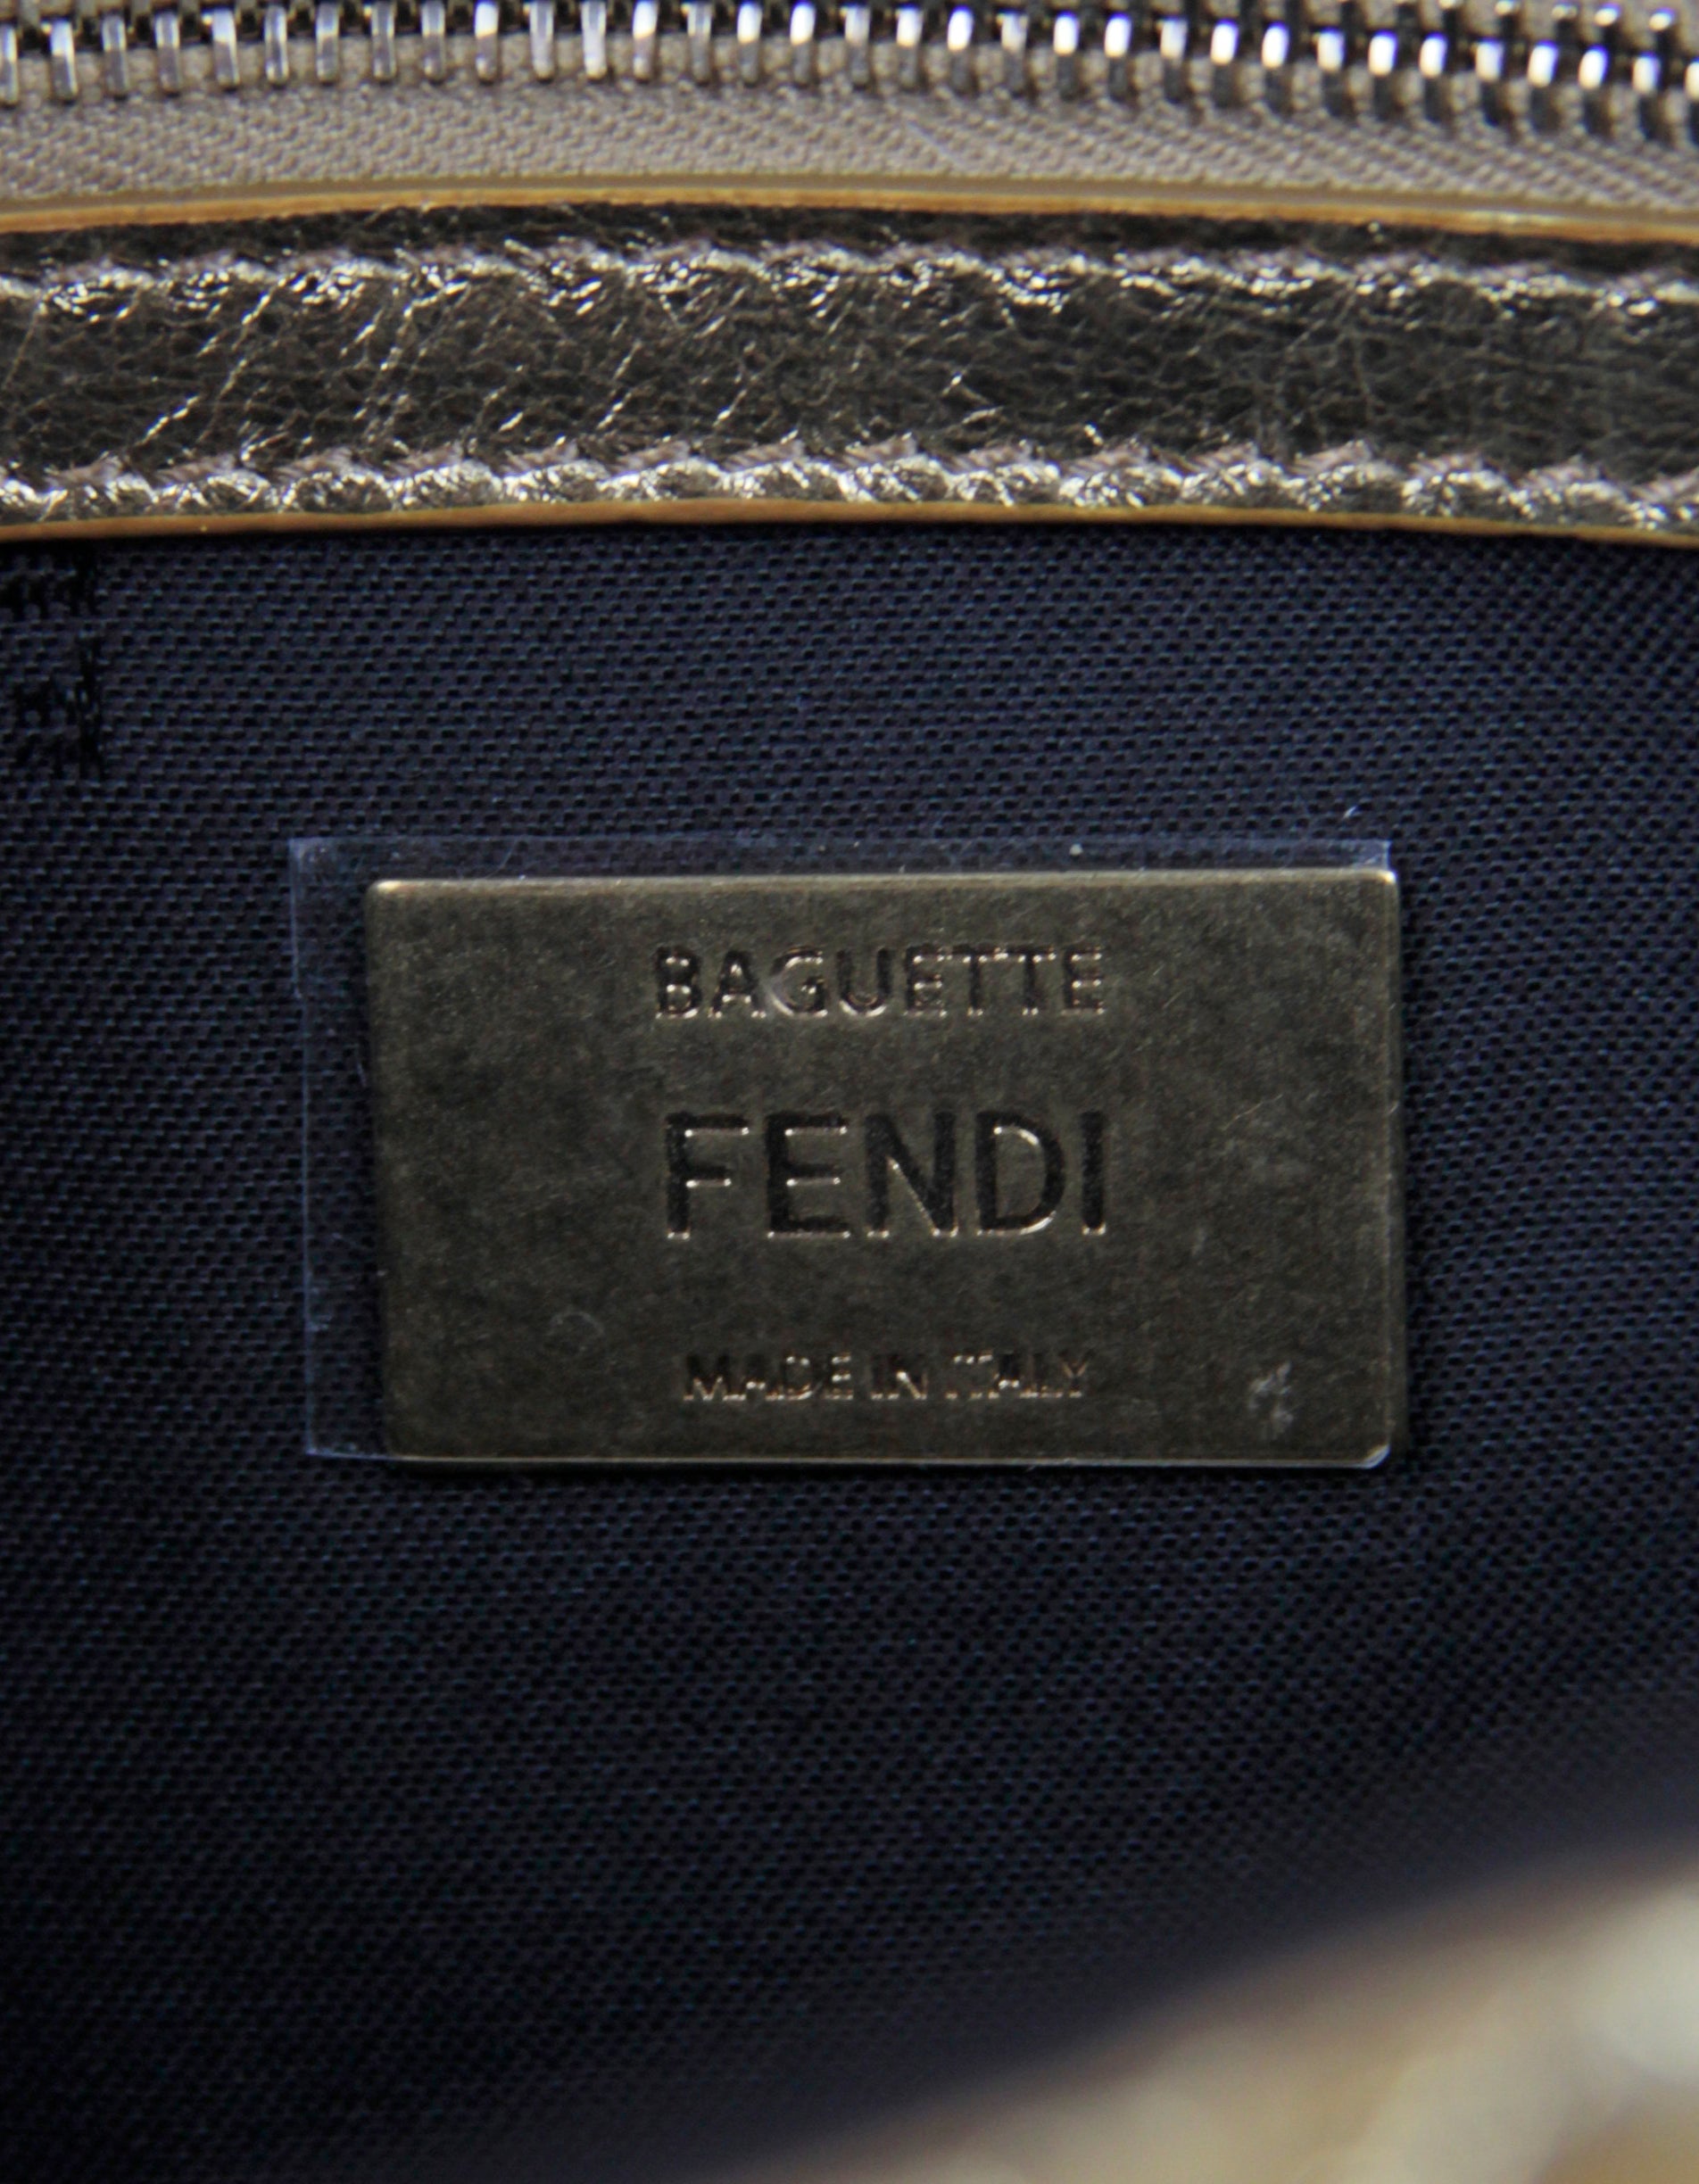 Fendi Gold Leather Embossed Logo Baguette NM Bag w/ Two Straps